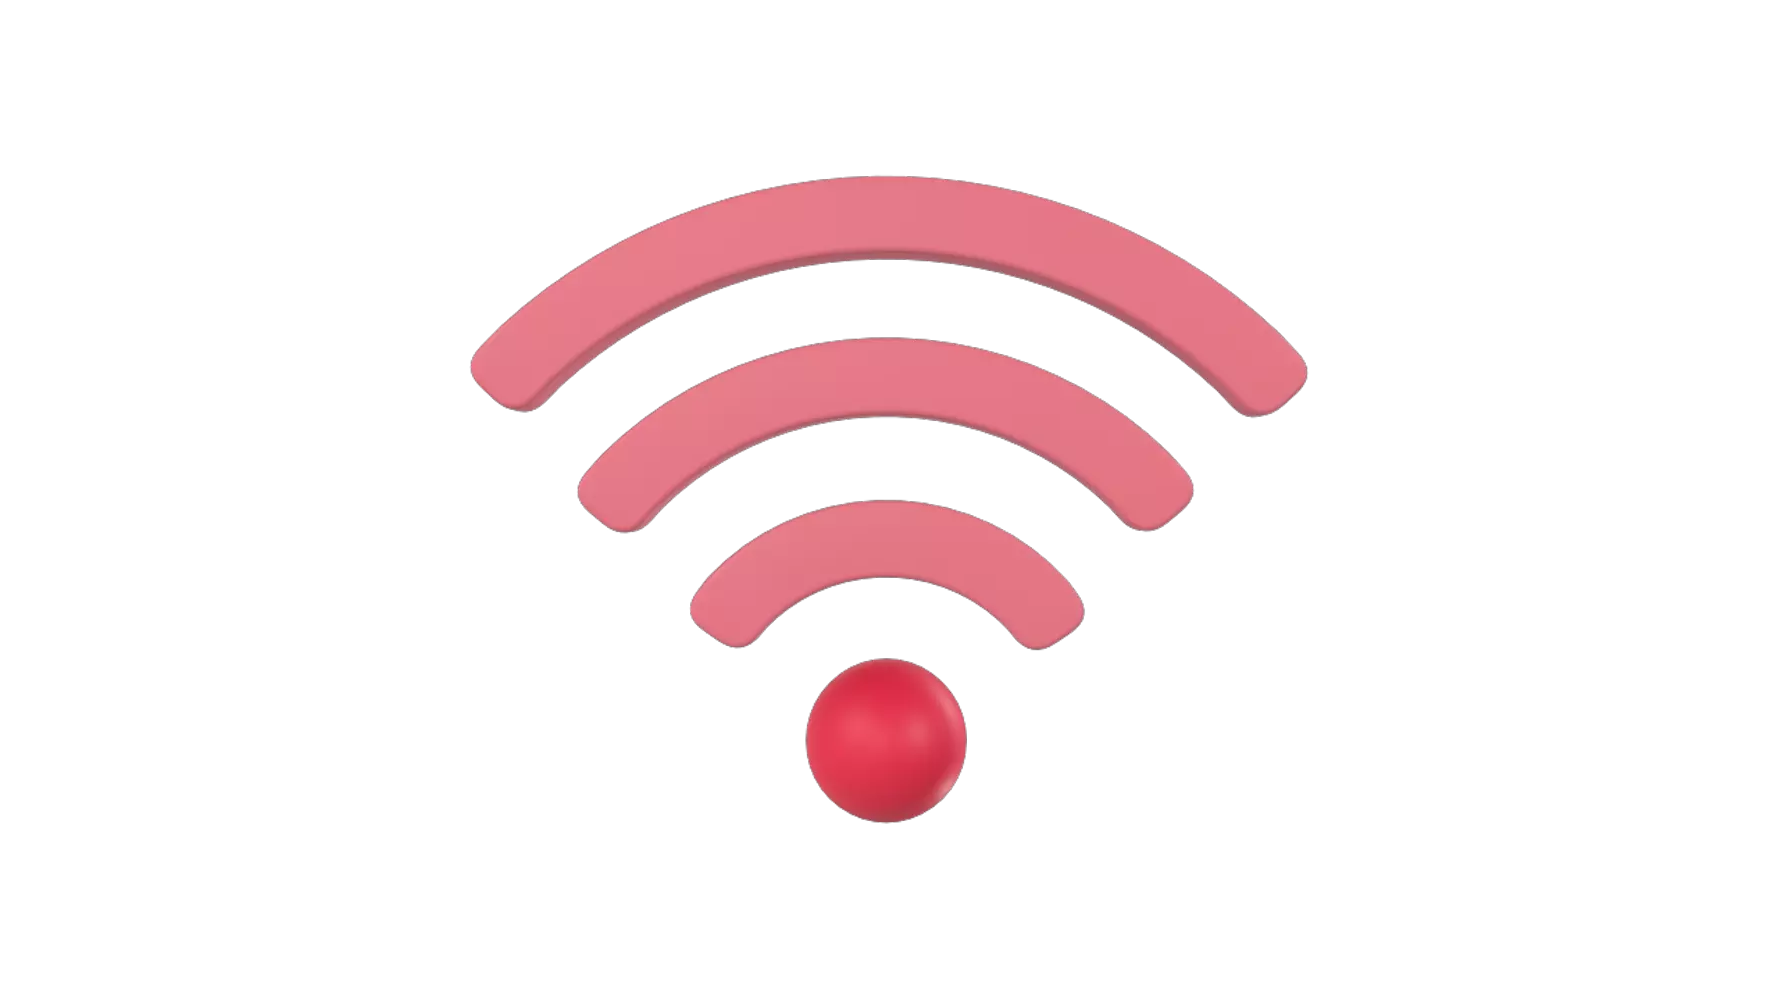 Wifi 3D Graphic